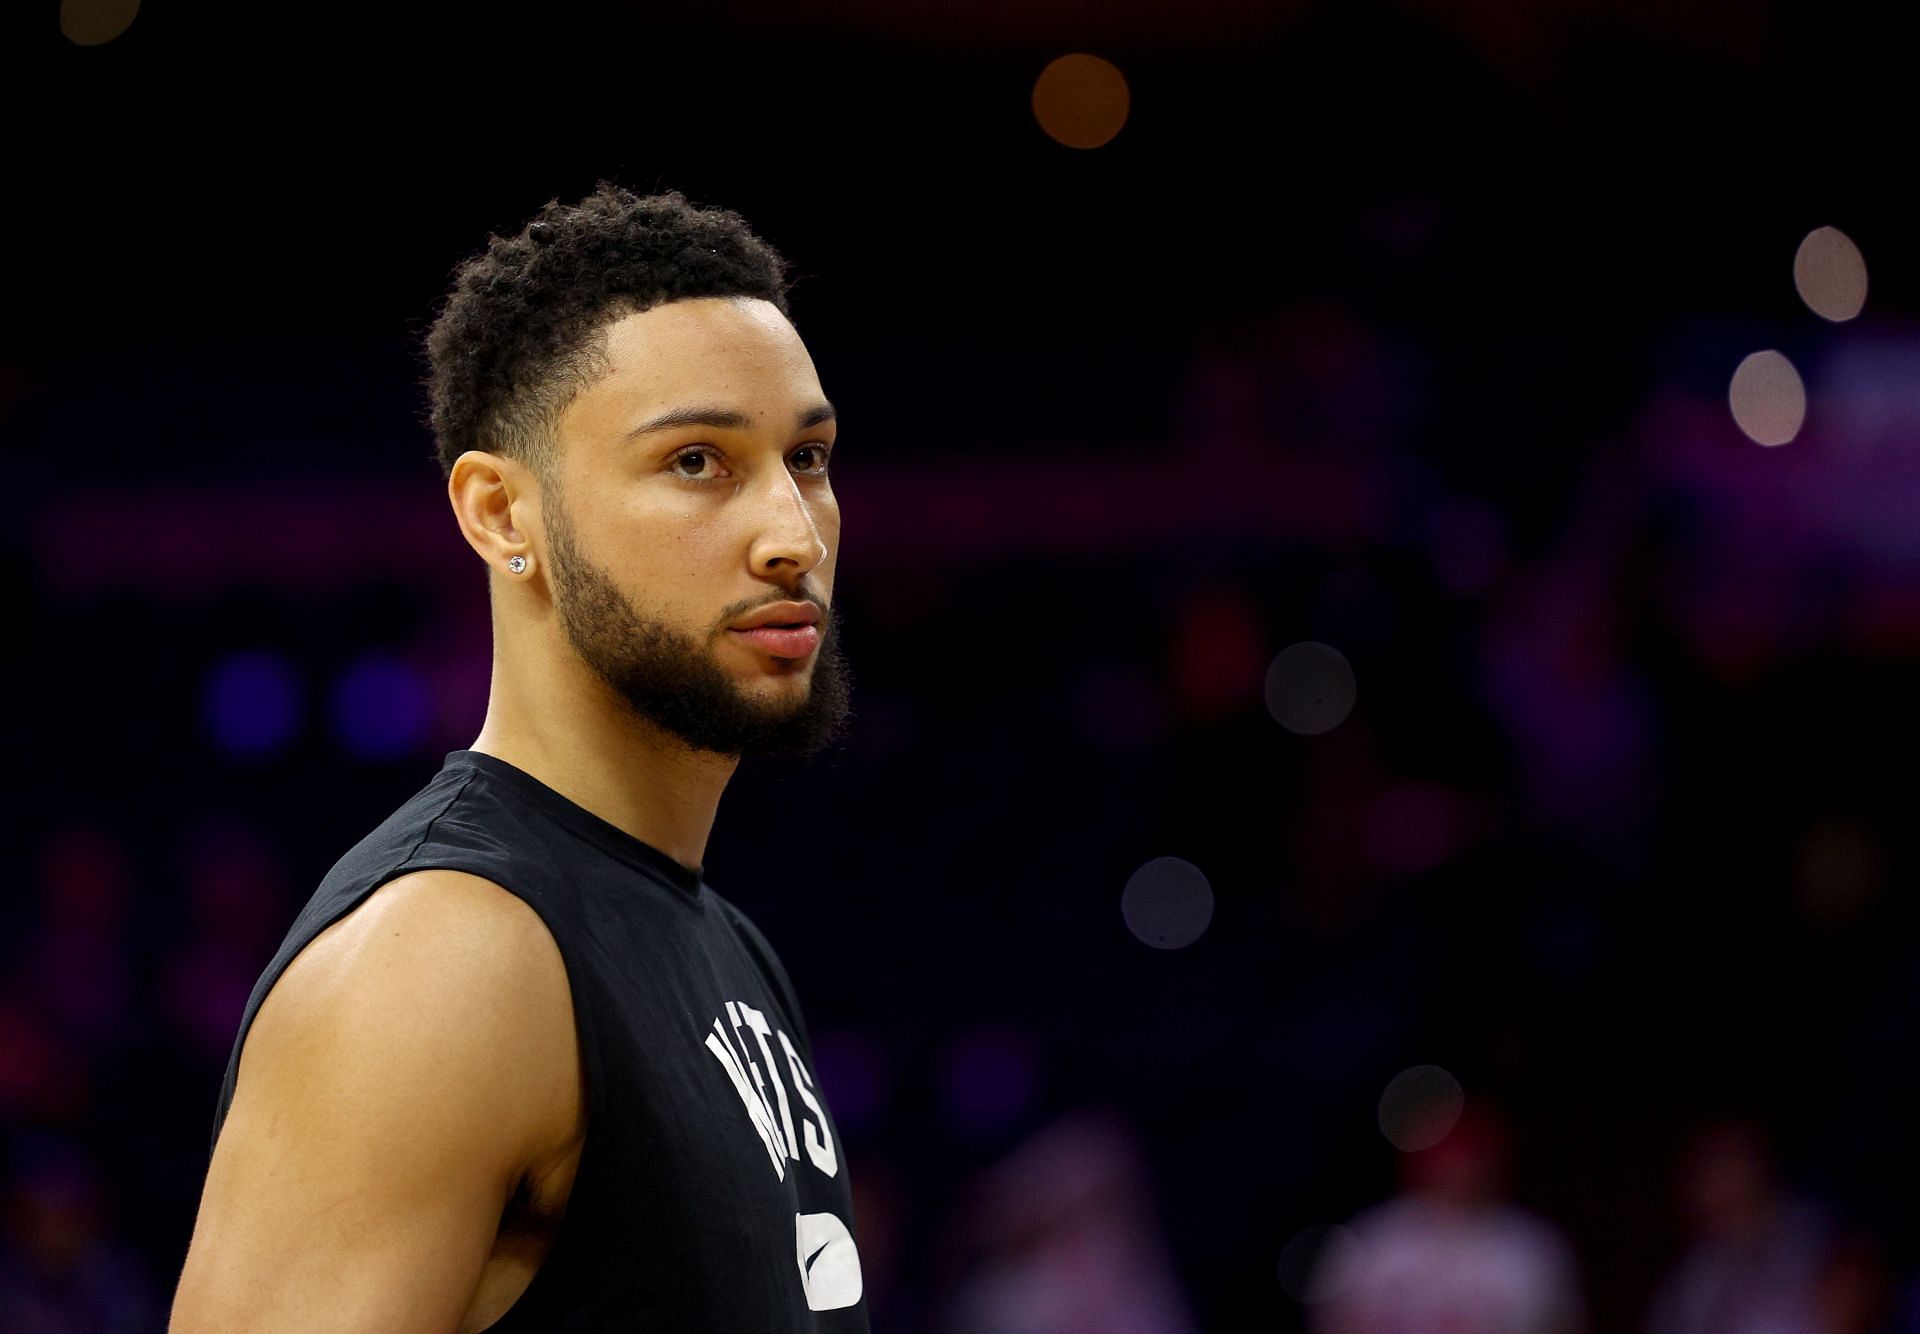 Ben Simmons will have to put on a special performances for the Brooklyn Nets next season, if he wants to win back the faith of his teammates